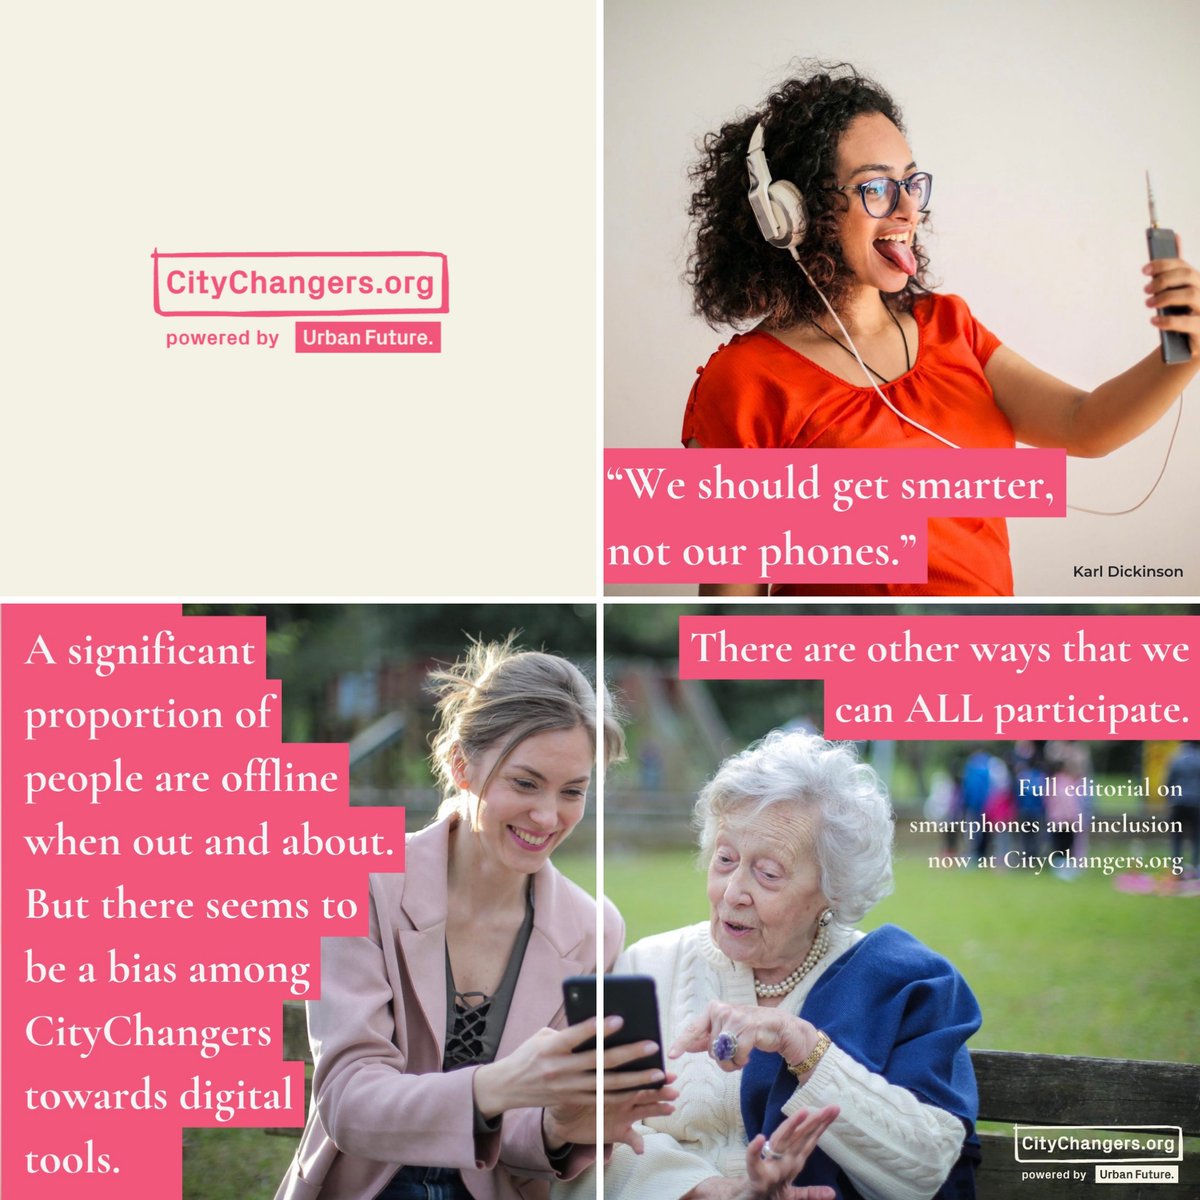 Digitisation is brilliant! 📲 At least, if you have the equipment to make use of it. Many don’t. Check out the latest editorial on #smartphones and fostering #inclusion in our cities: citychangers.org/editorial-smar…